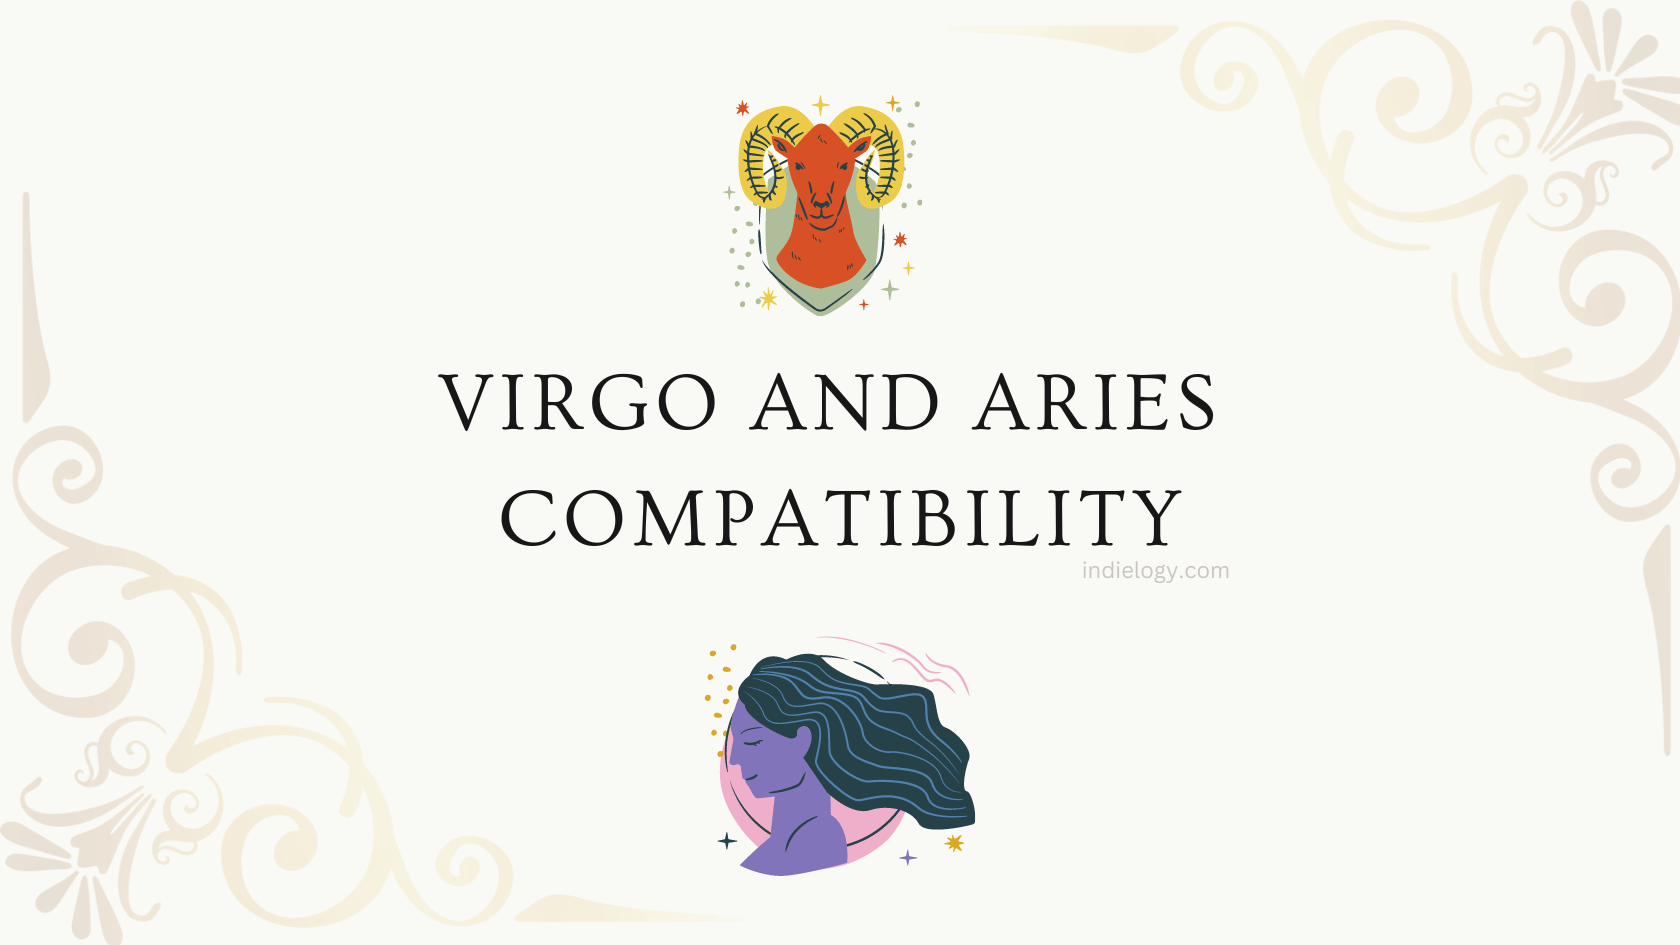 Virgo and Aries compatibility